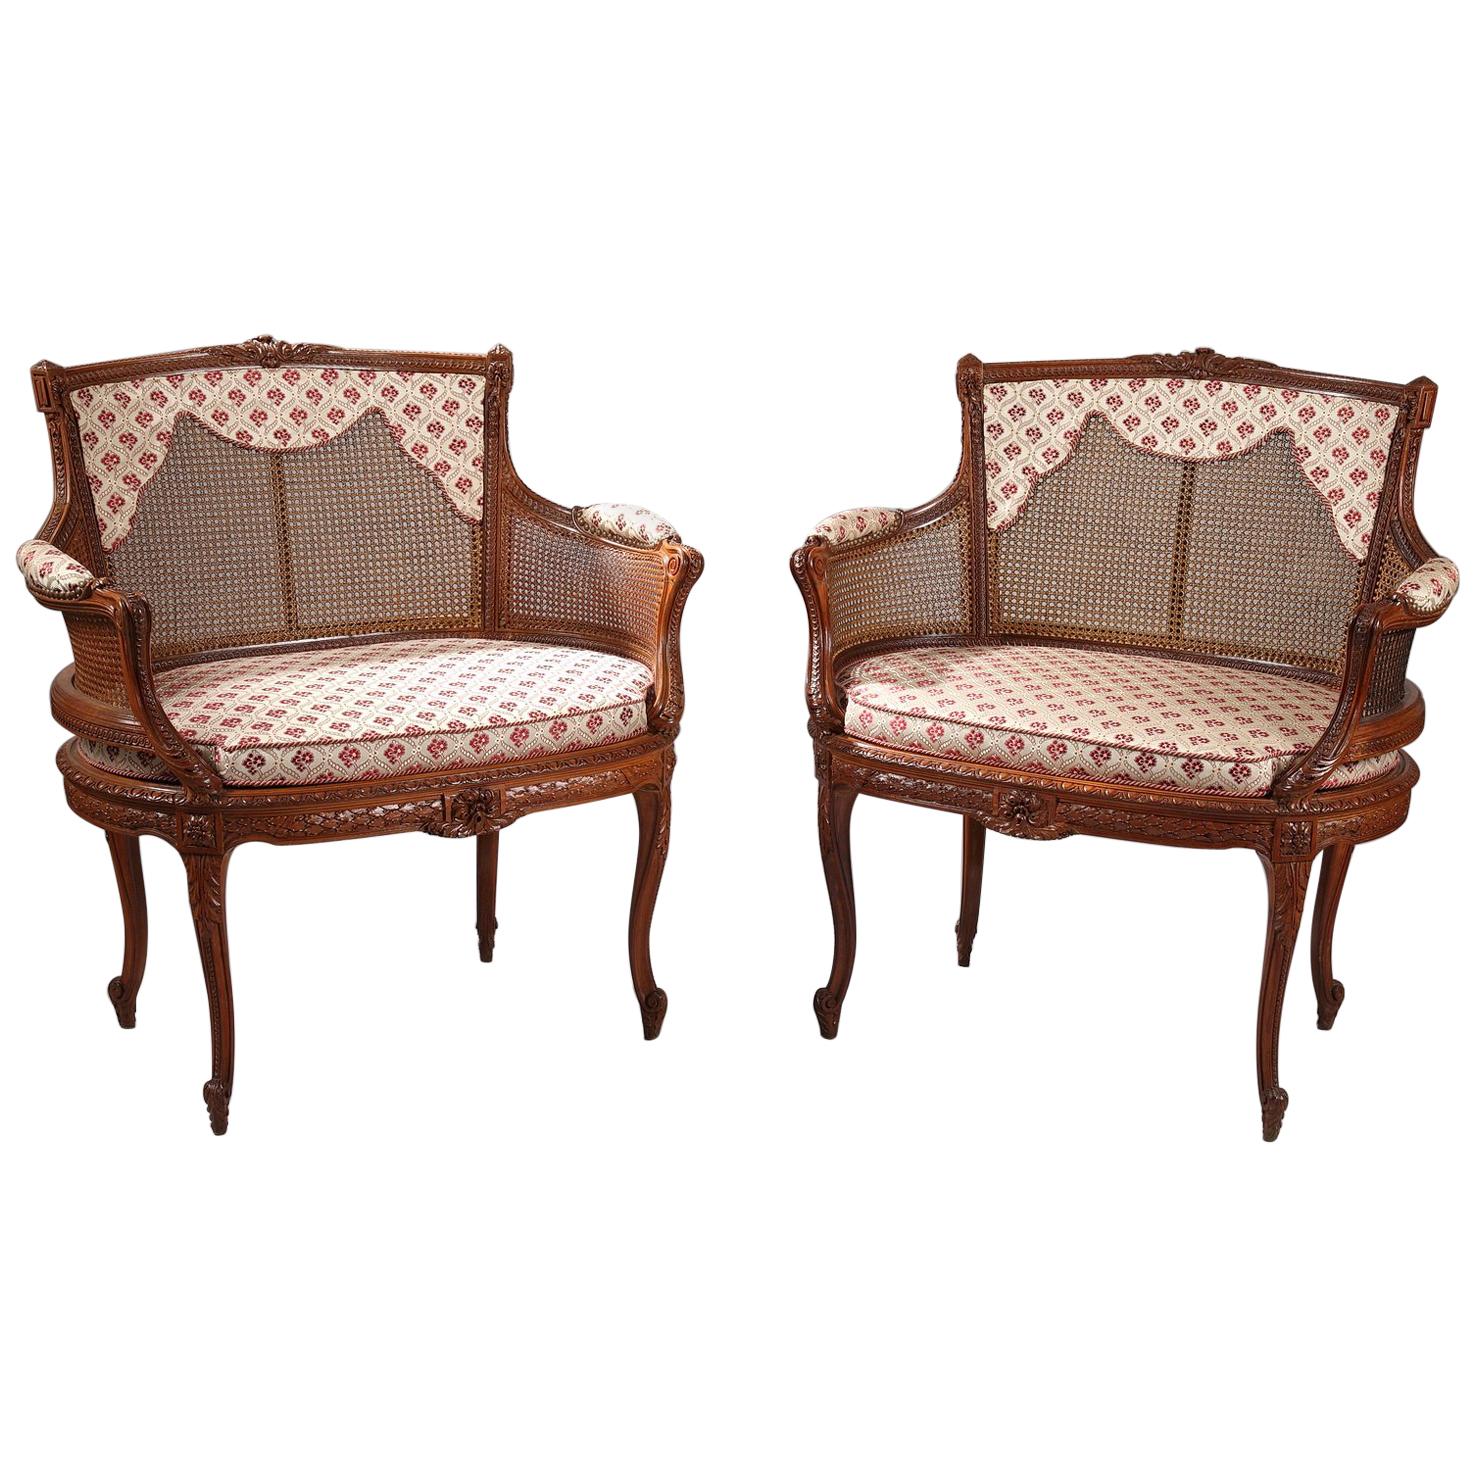 Fine Pair of Marquise Seats After Georges Jacob, France, Circa 1880